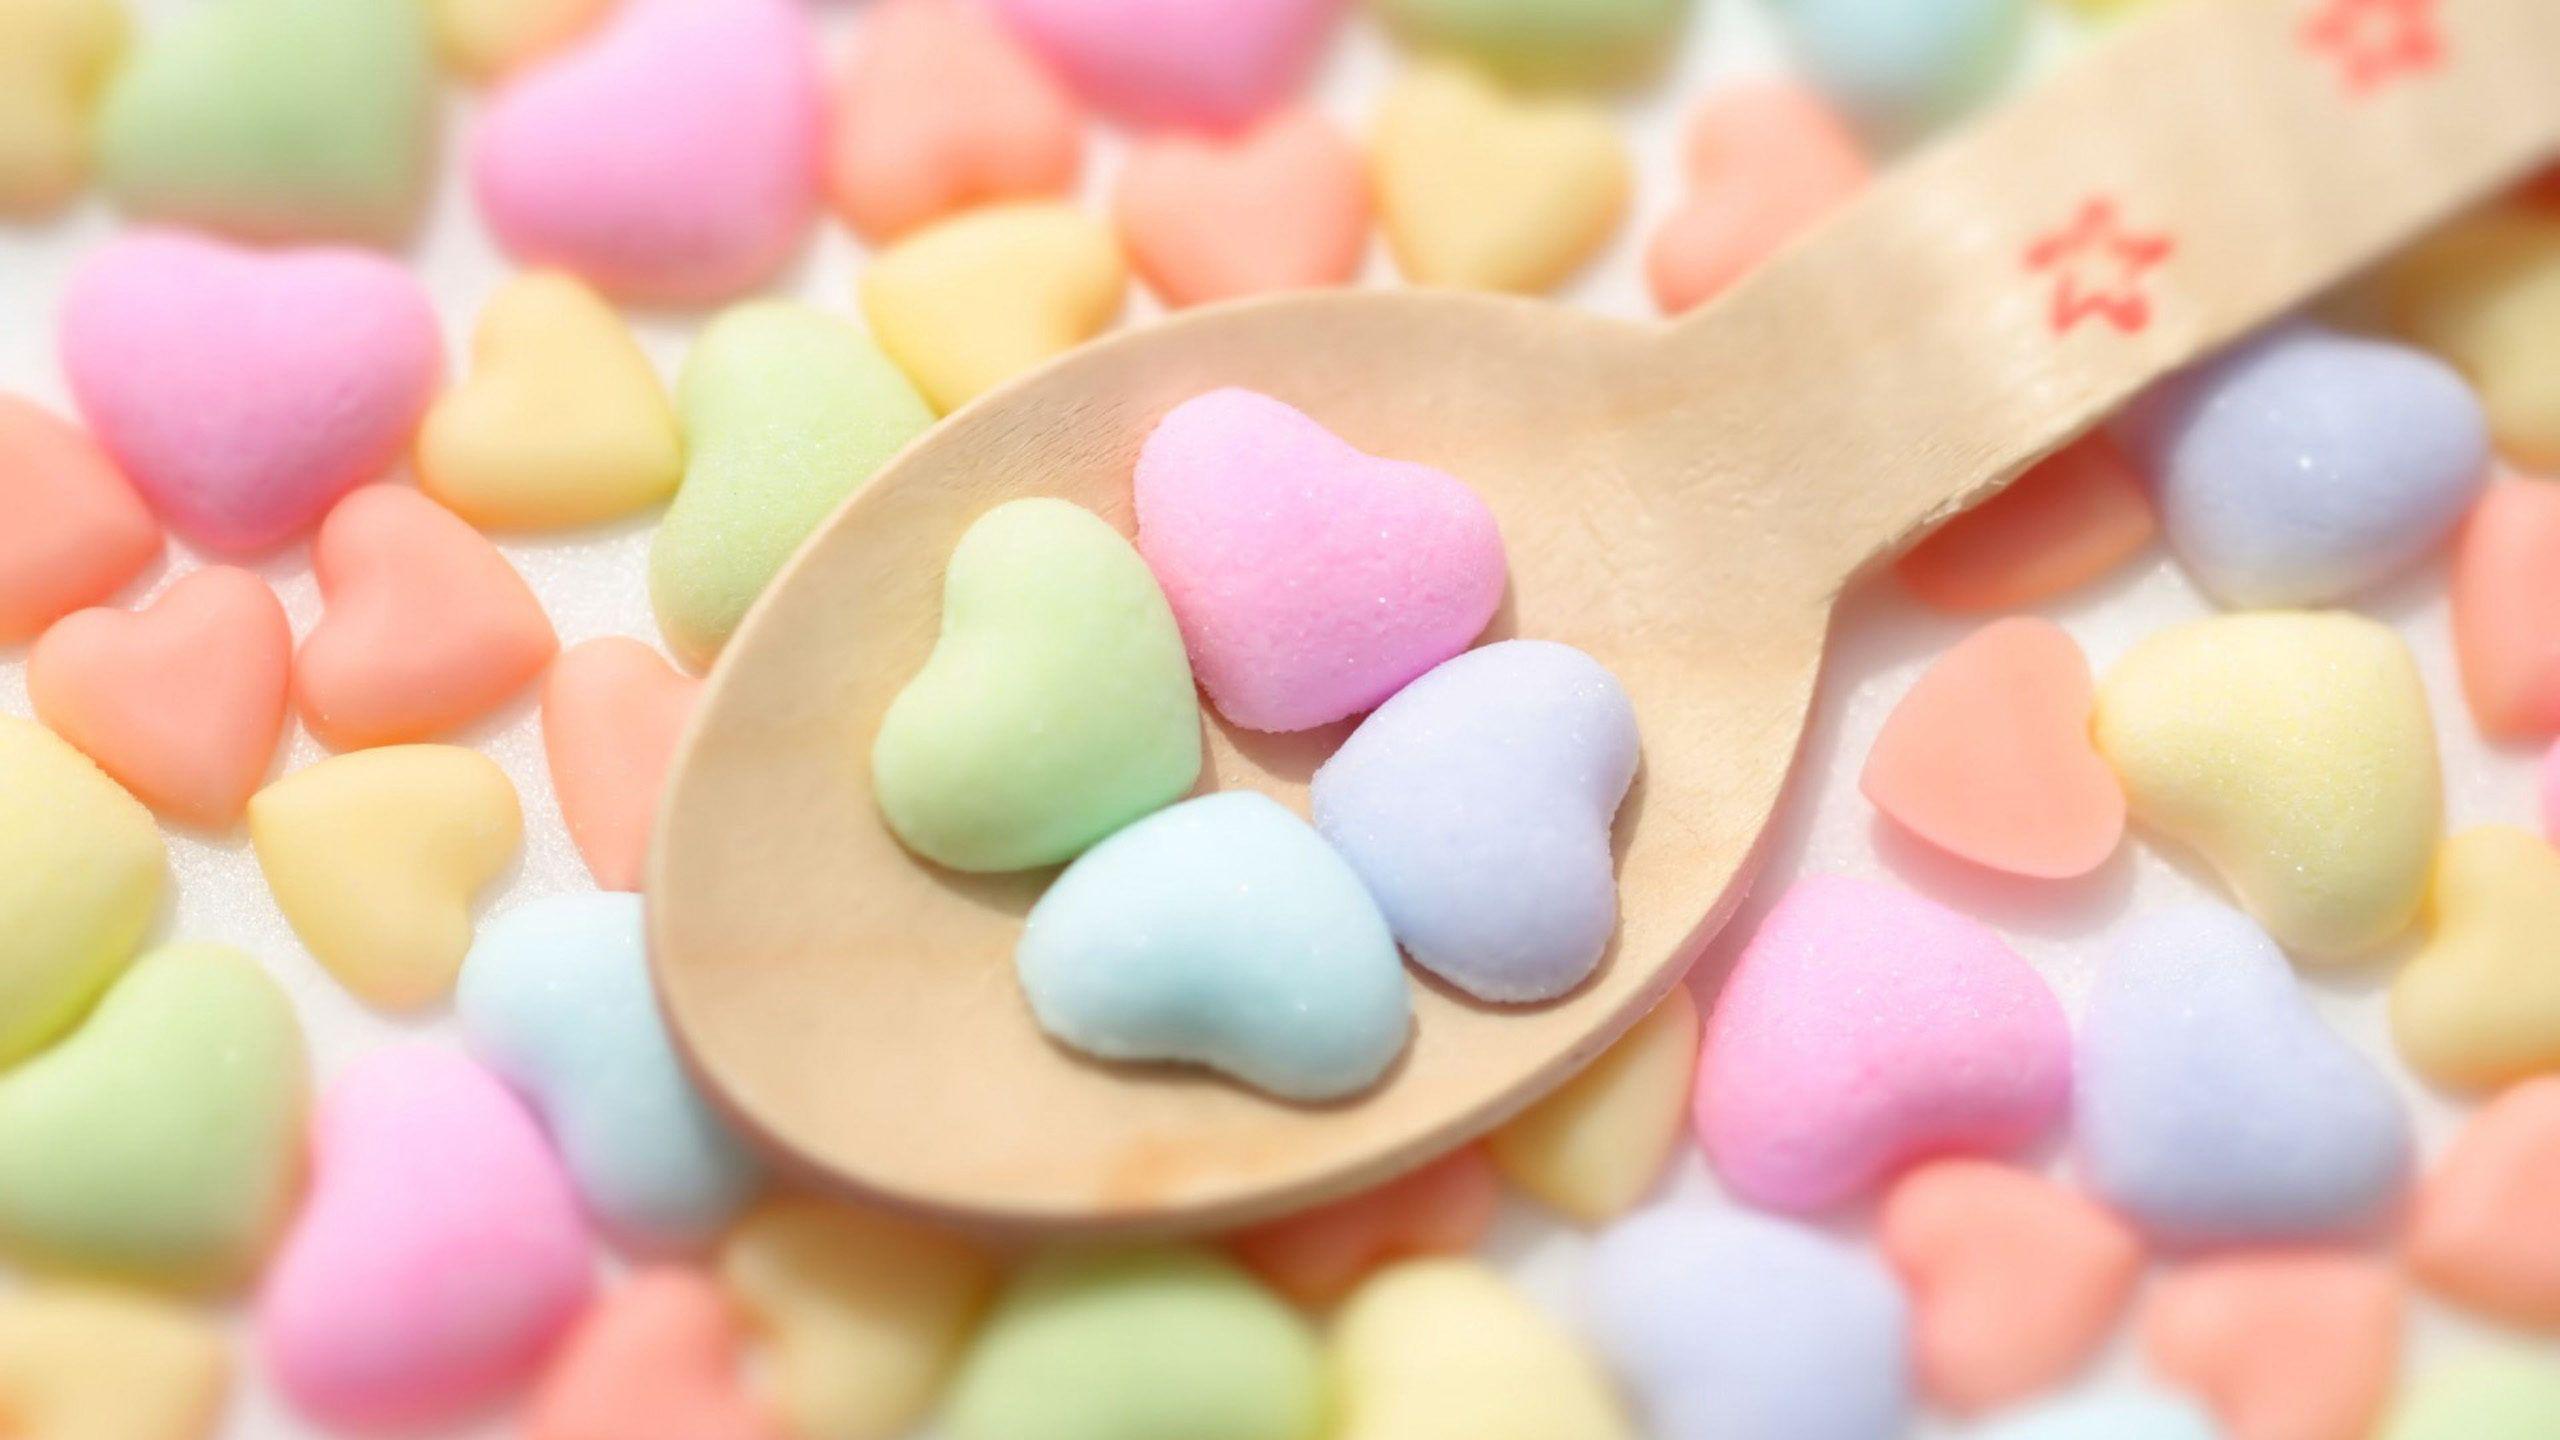 Love Marshmallow Wallpaper. Marshmallow. Candy picture, Cute